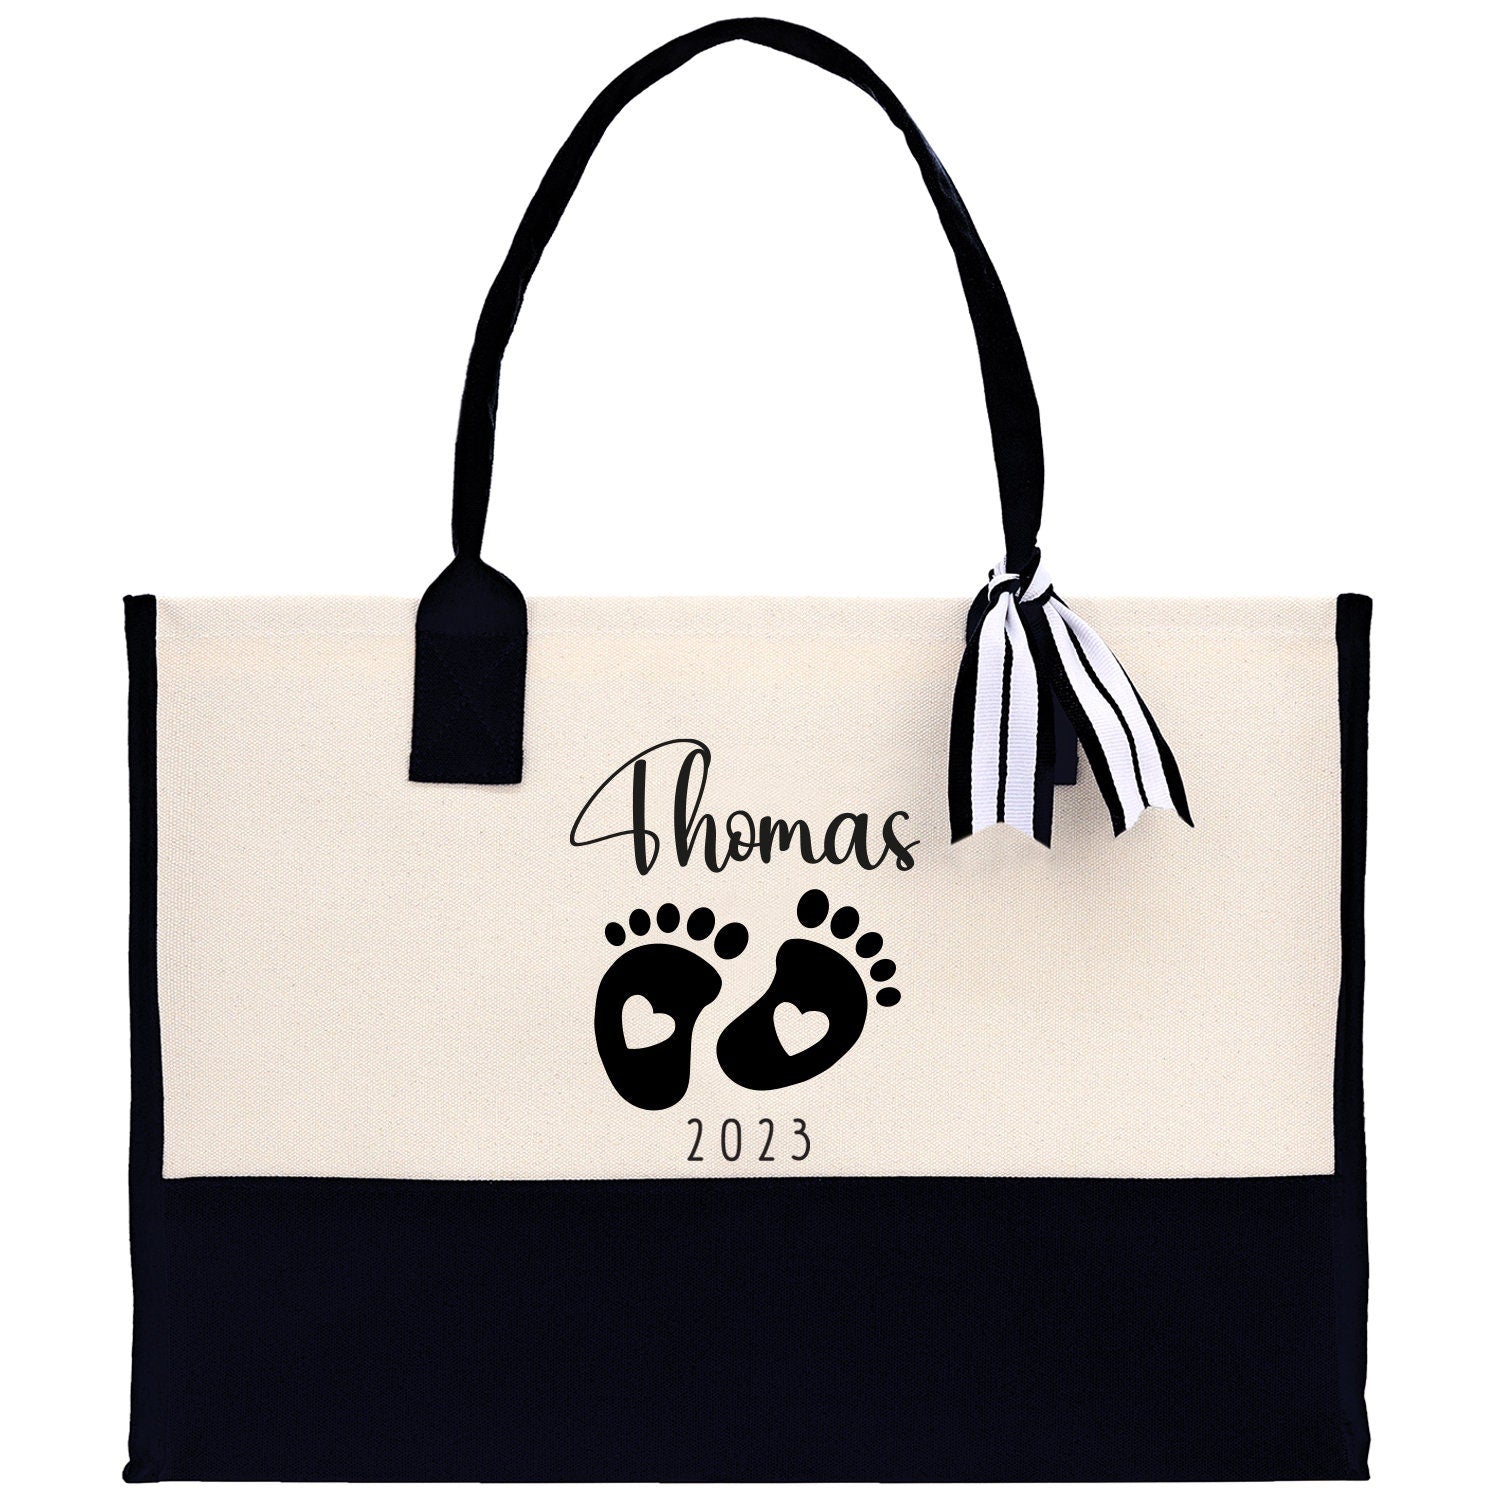 Baby Feet Personalized Name and Date Tote Bag for New Mom Pregnant Mom Shower Gift Baby Footprints Labor & Delivery Chick Tote Carrying Bag